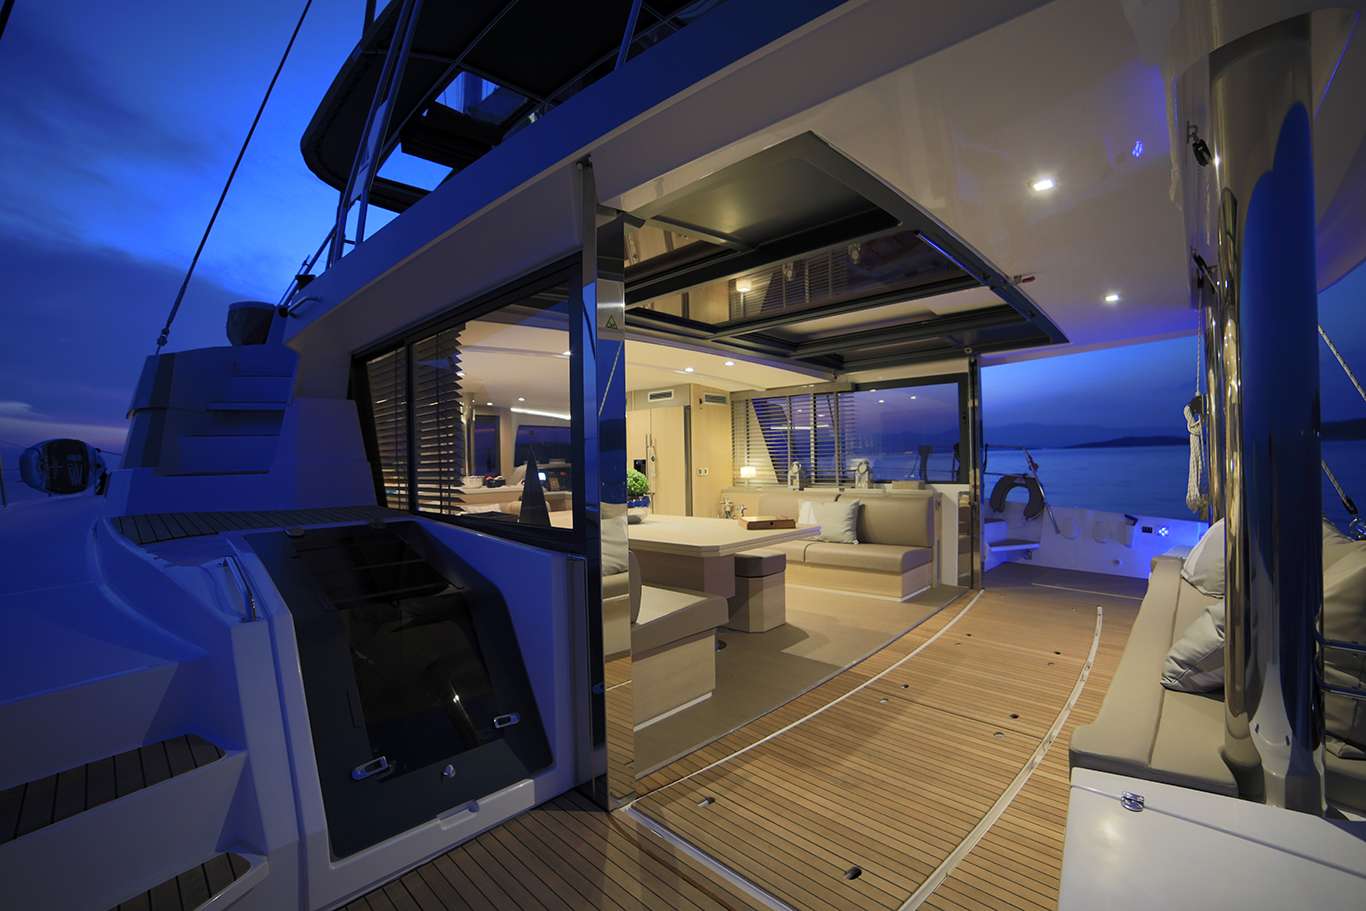 NEW HORIZONS 3 Yacht Charter - Aft by night